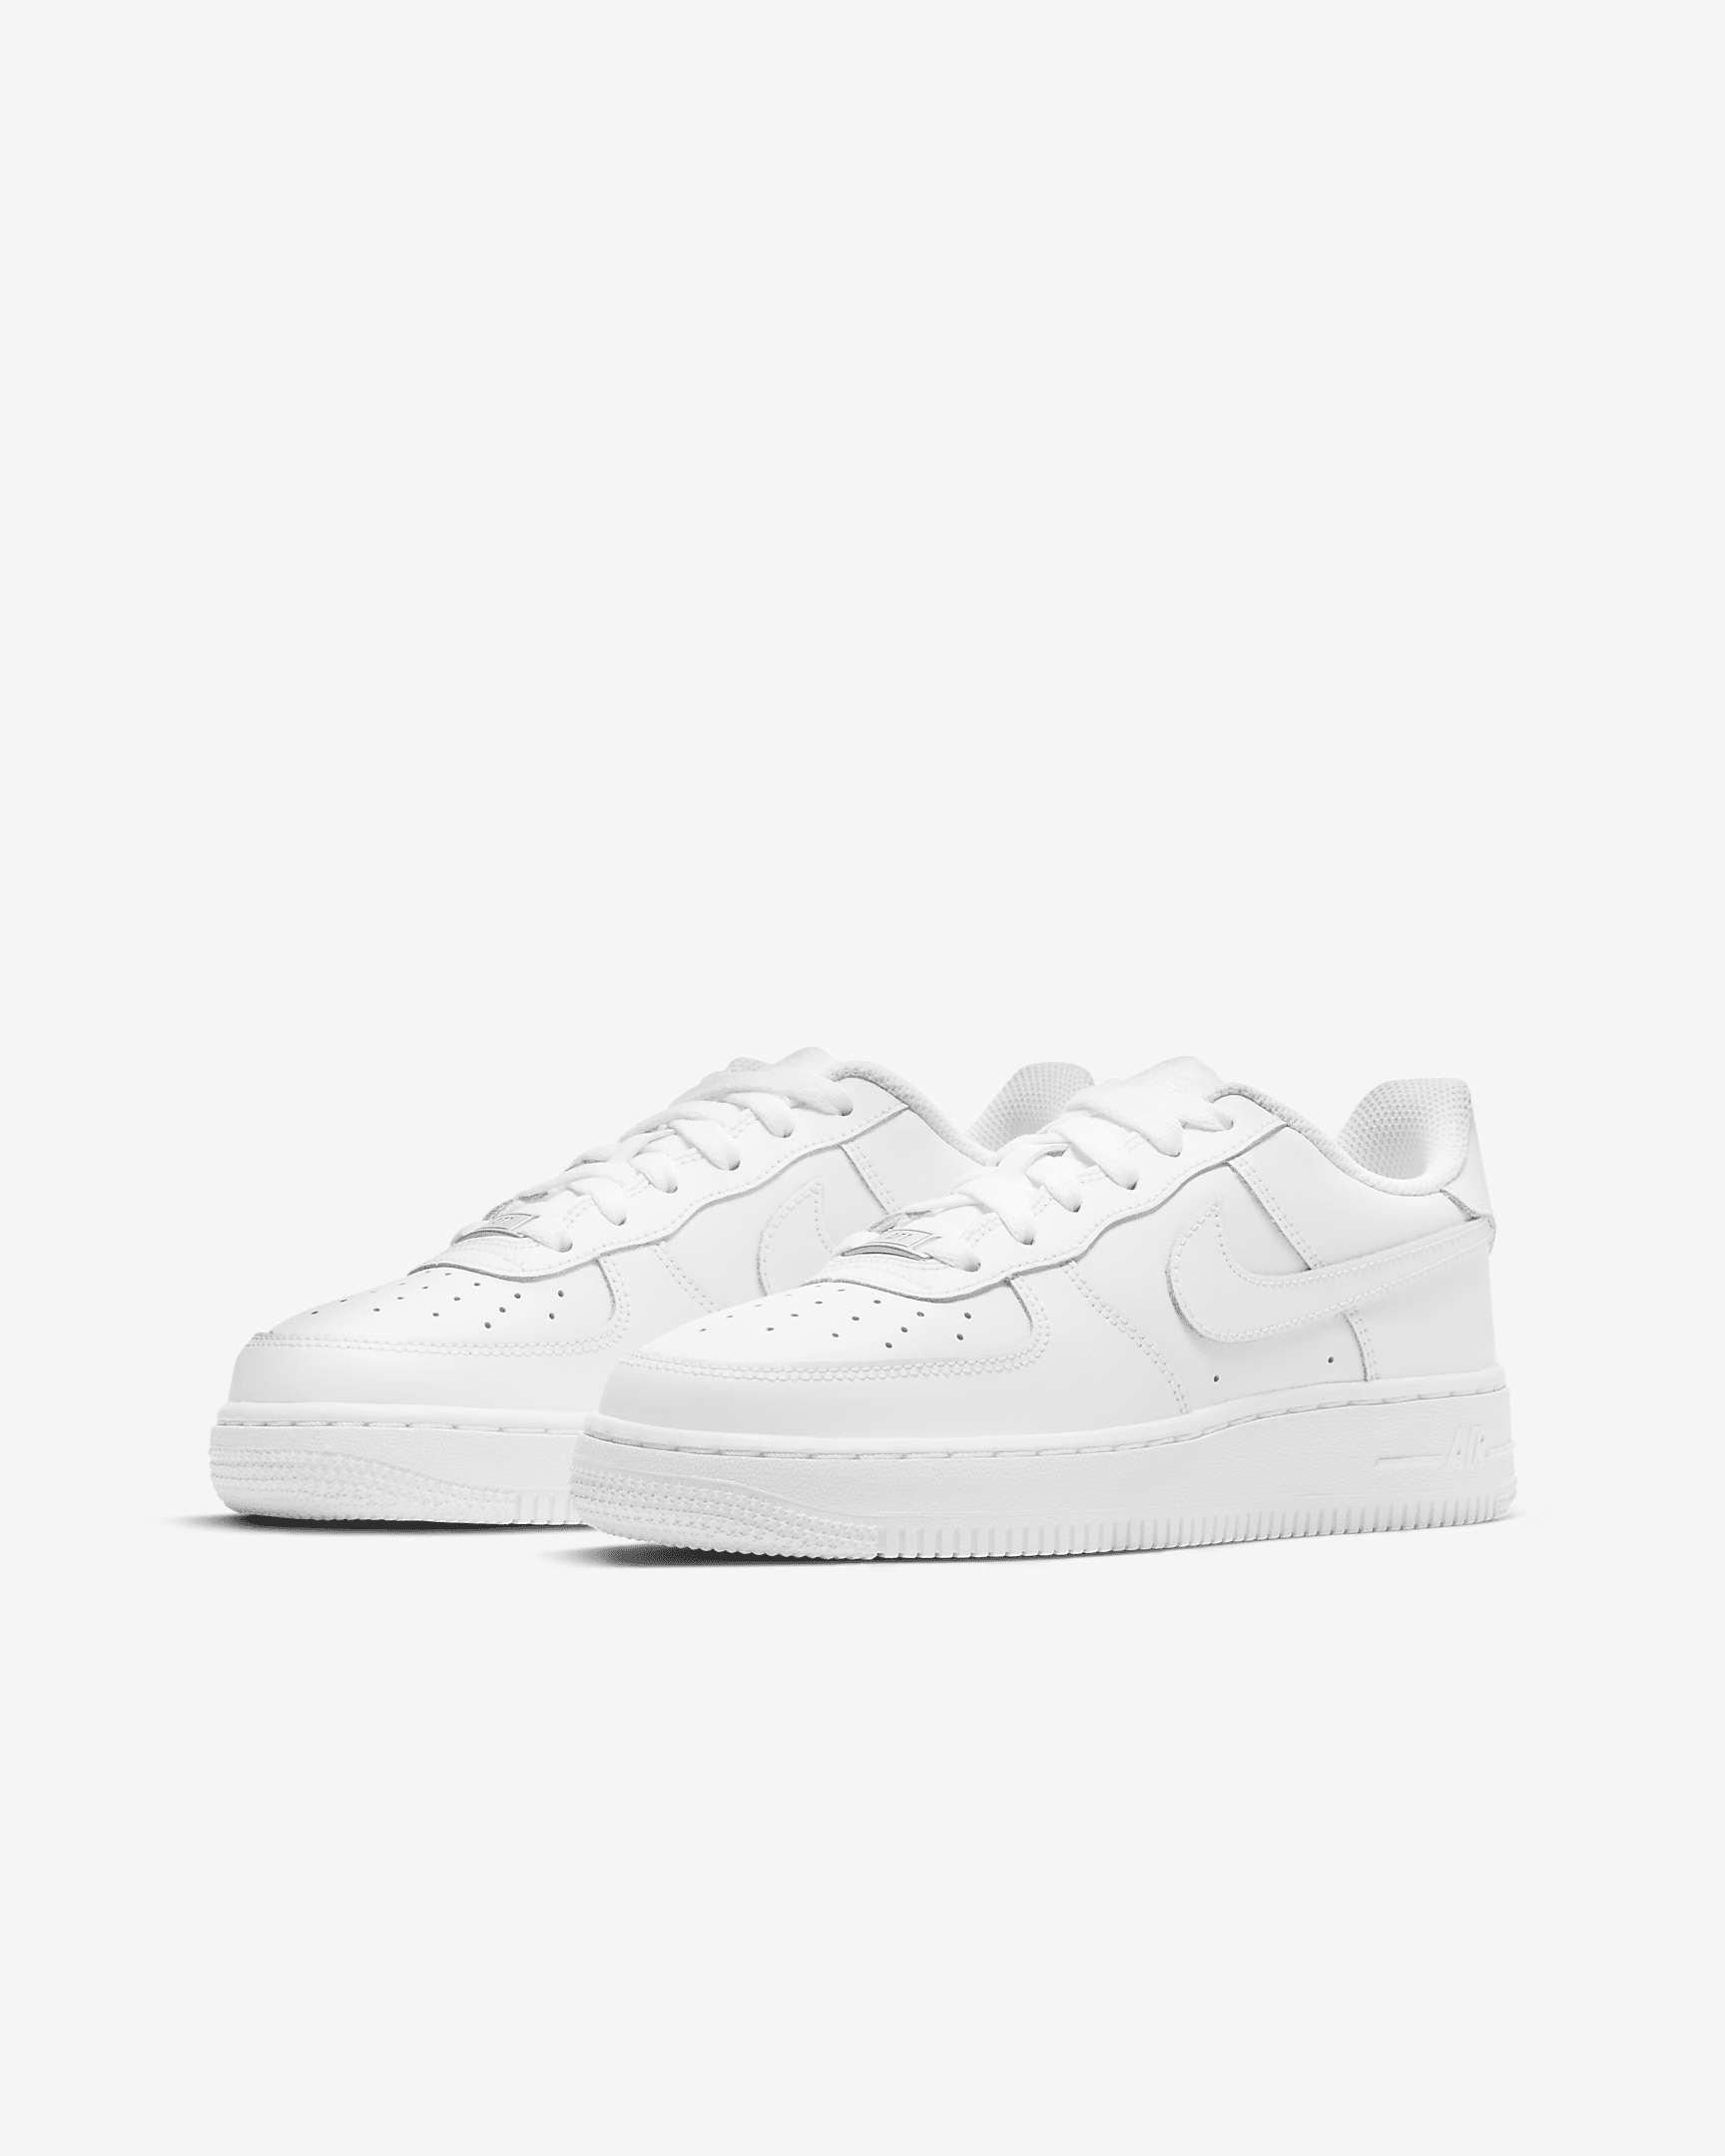 Nike Air Force 1 ‘07 Shoes